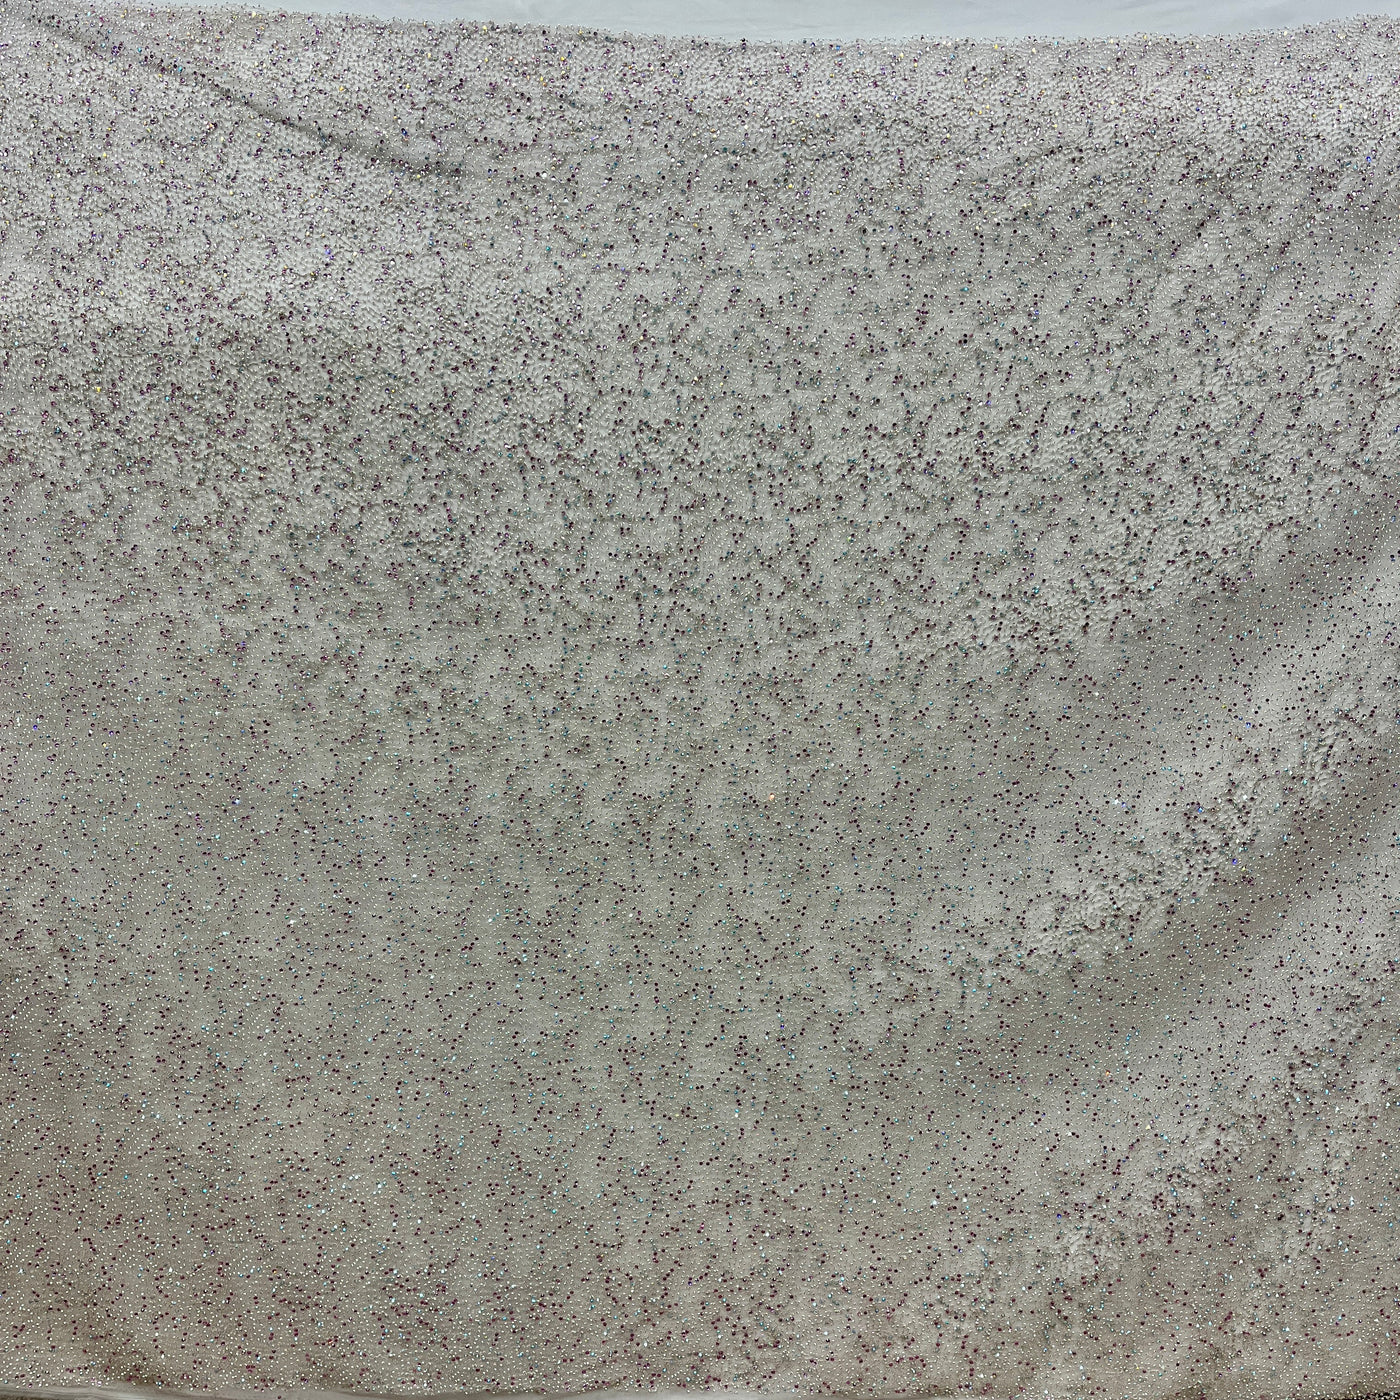 Beaded Lace Fabric Embroidered on 100% Polyester Net Mesh | Lace USA - GD-2251 - 60" Wide